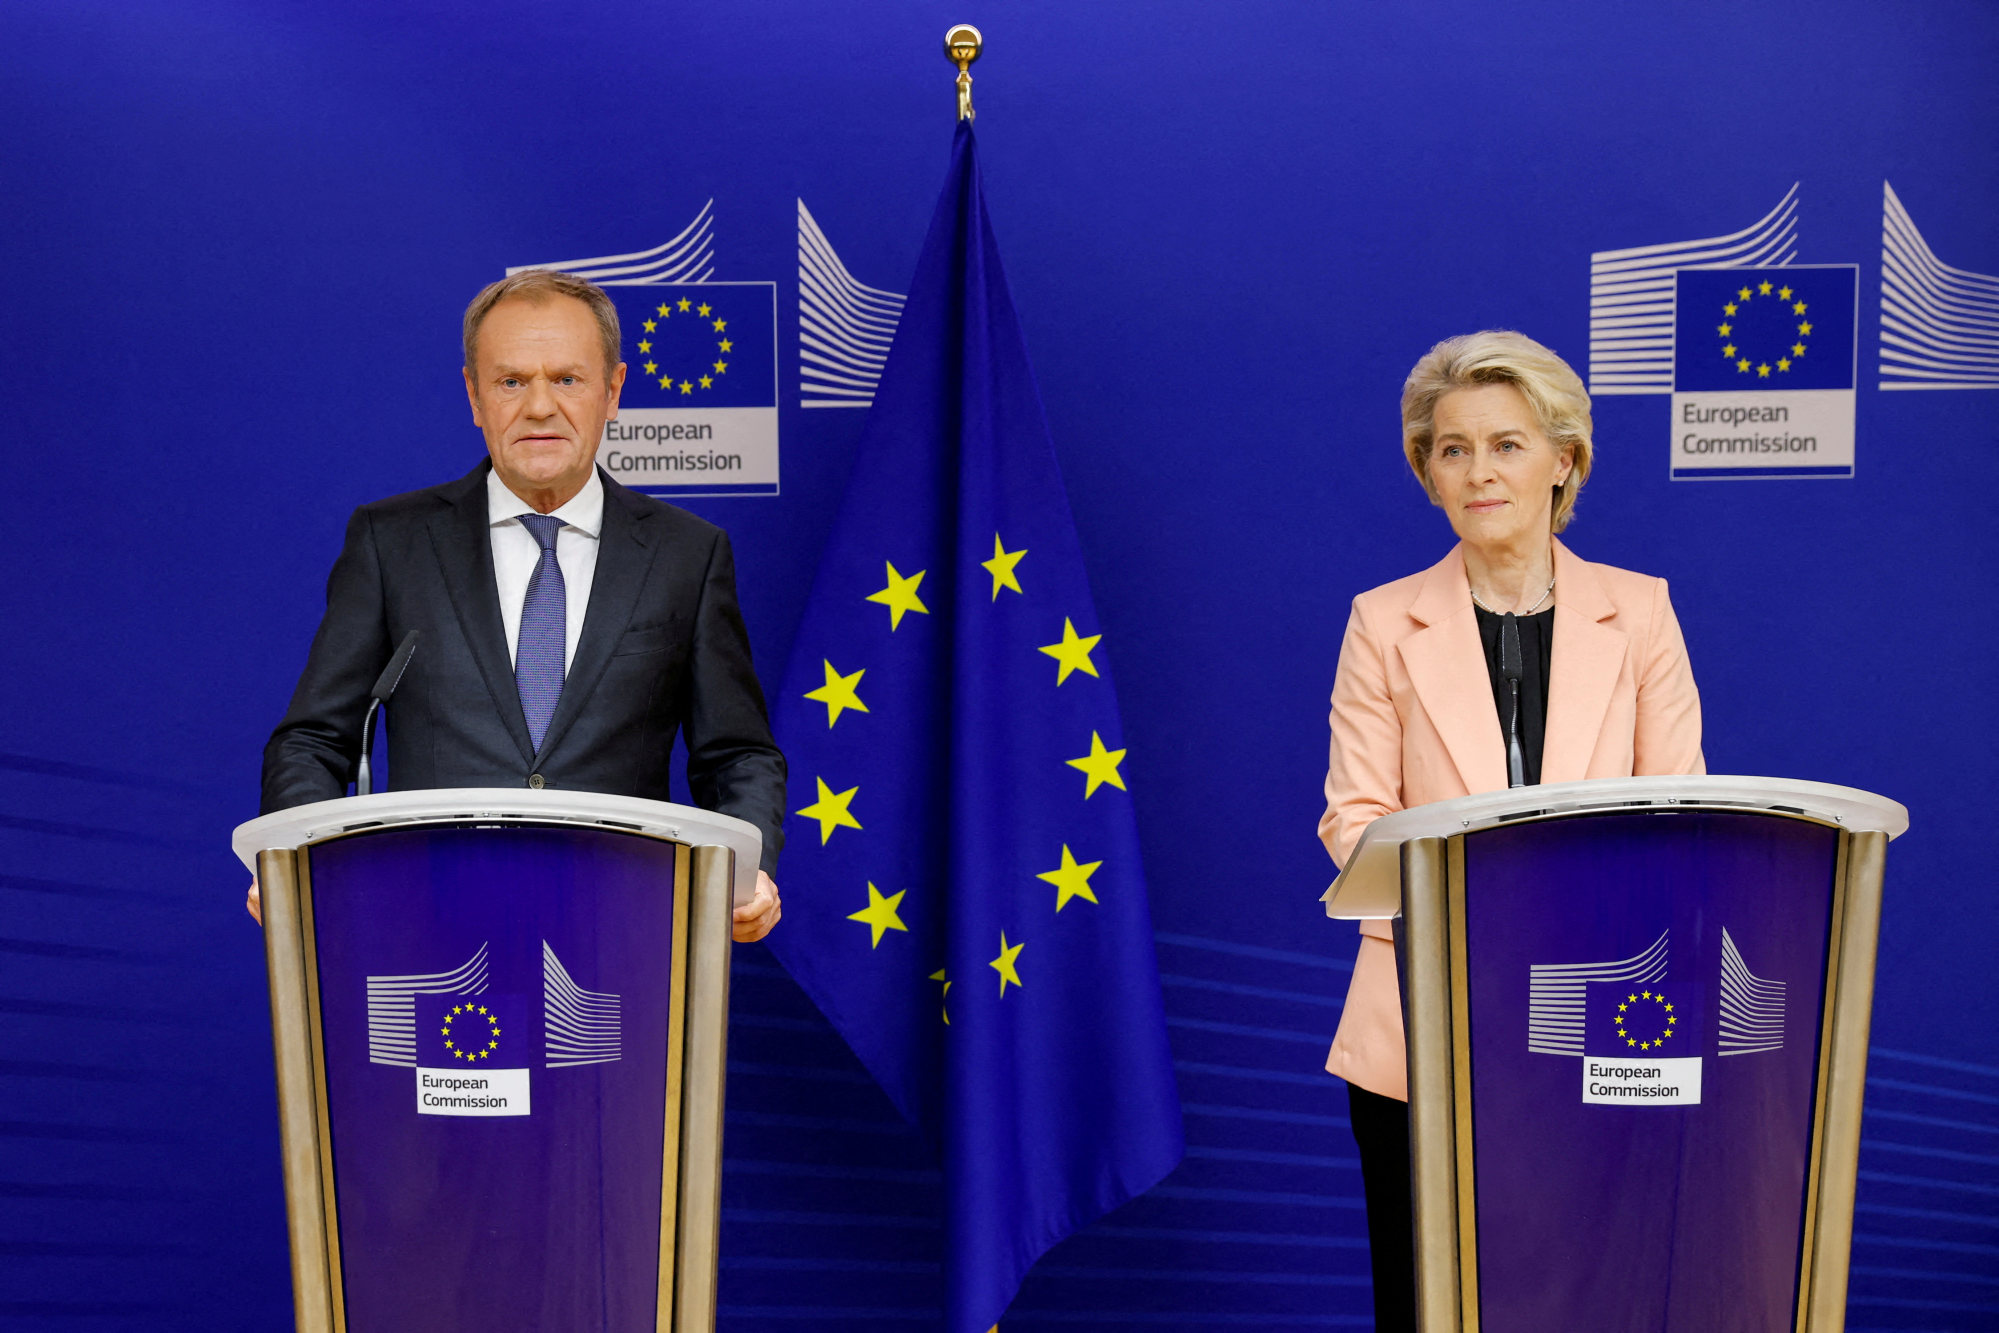 donald tusk becomes poland’s pm again with mission of improving european union ties